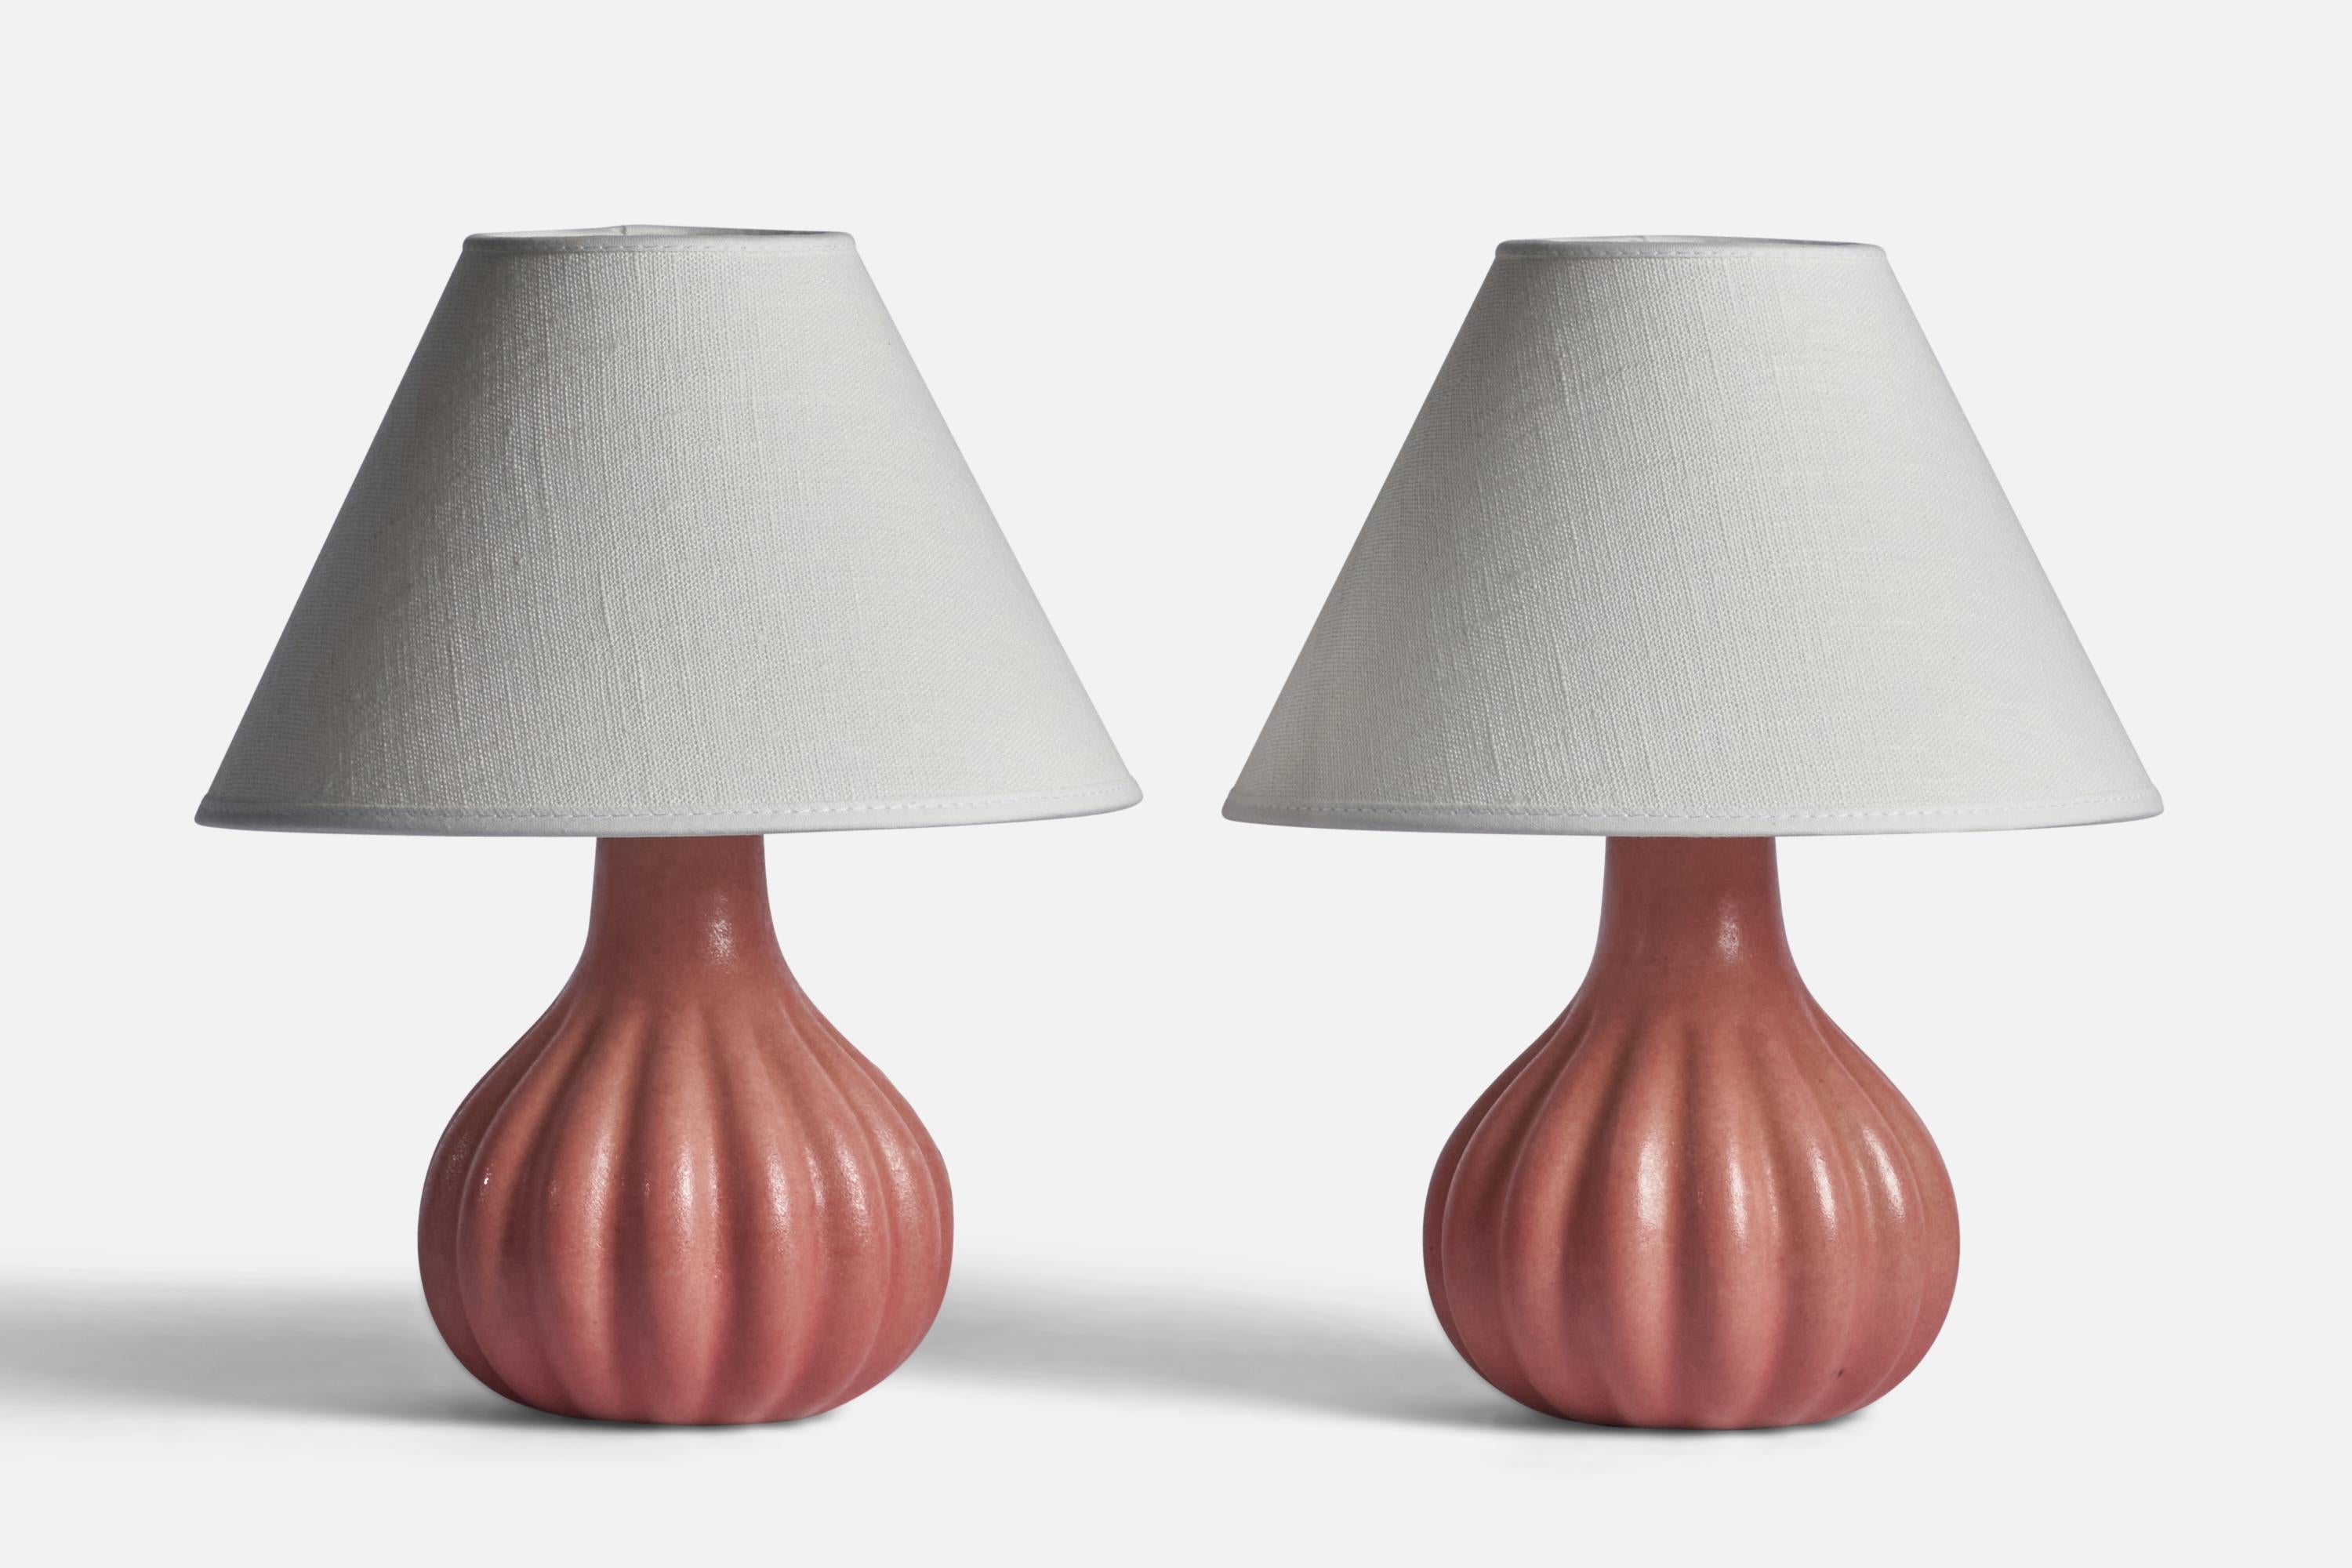 A pair of fluted pink-glazed stoneware table lamps designed and produced by Ego Stengods, Sweden, 1960s.

Dimensions of Lamp (inches): 7.25” H x 5” Diameter
Dimensions of Shade (inches): 3” Top Diameter x 8” Bottom Diameter x 5.4” H
Dimensions of